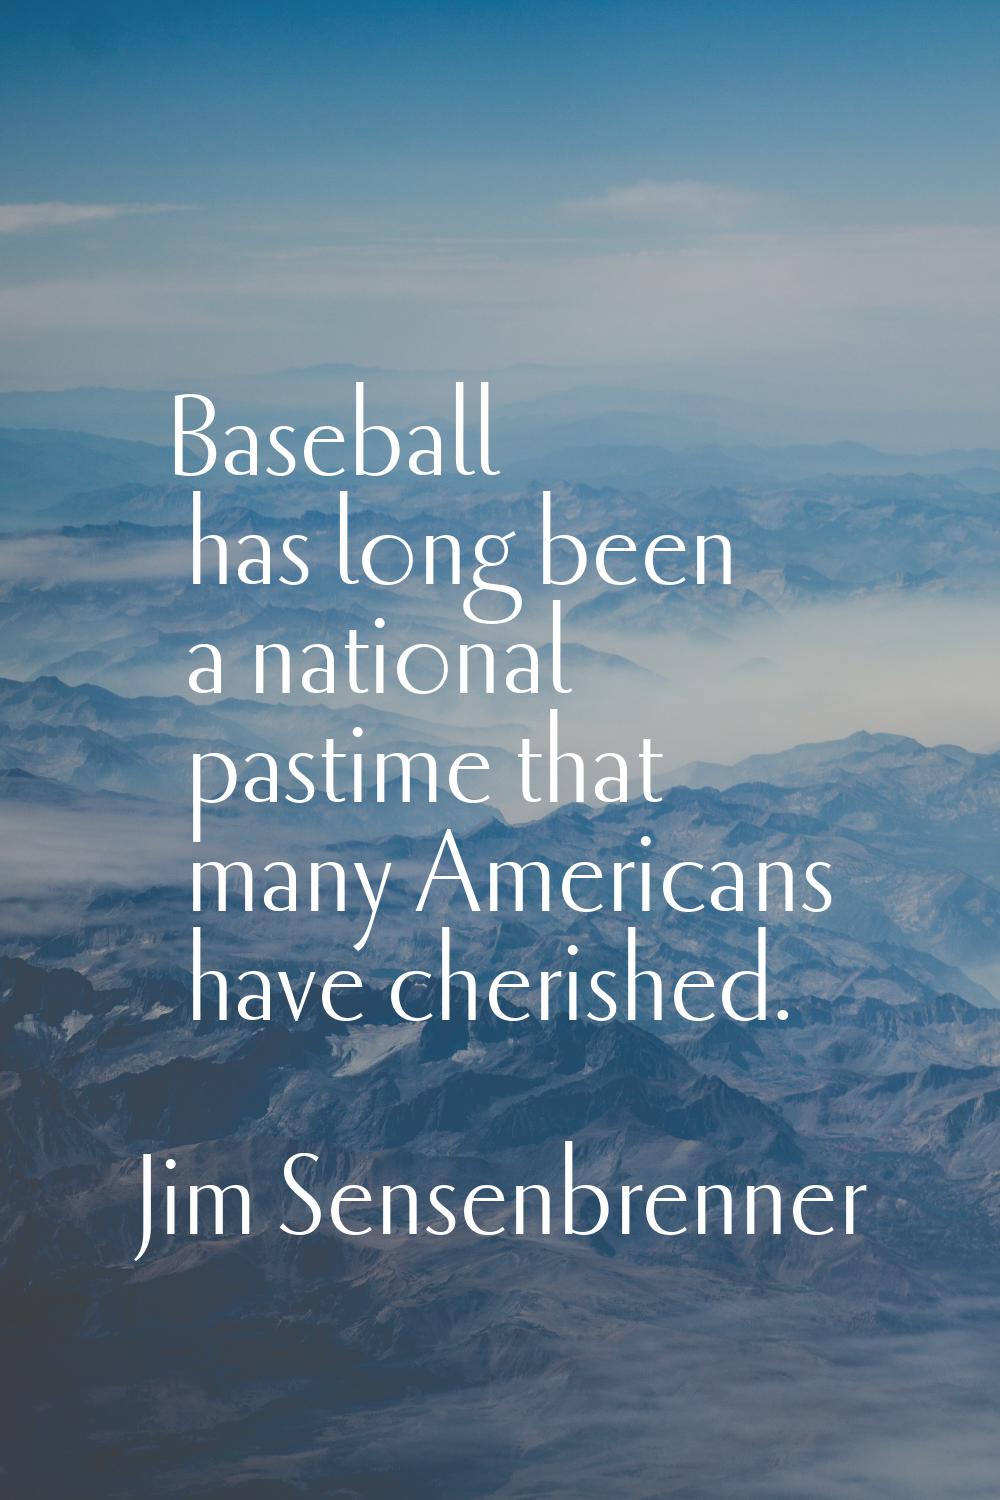 Baseball has long been a national pastime that many Americans have cherished.